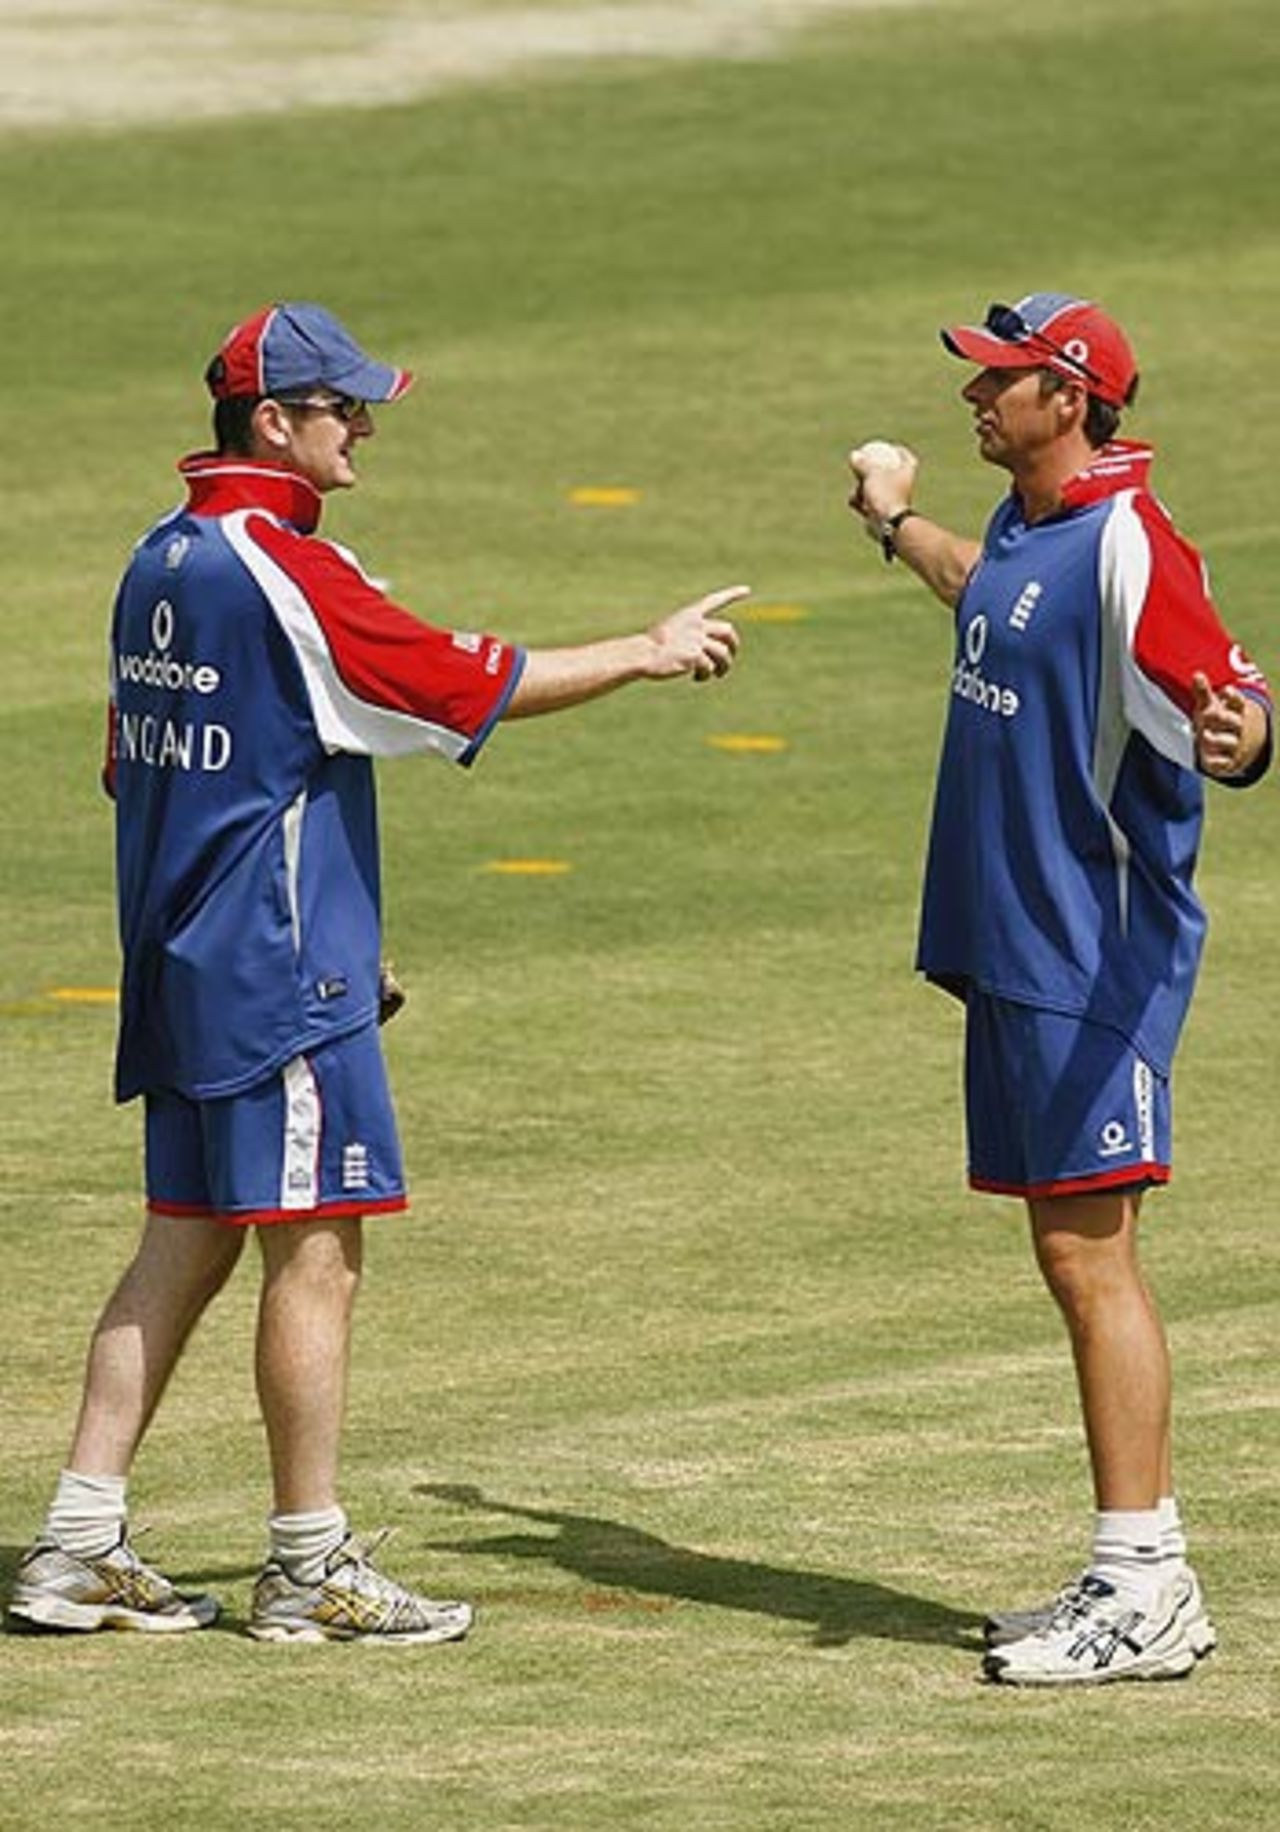 Troy Cooley, England's bowling coach, chats with his replacement Kevin Shine, India v England, 7th ODI, Indore, April 14, 2006